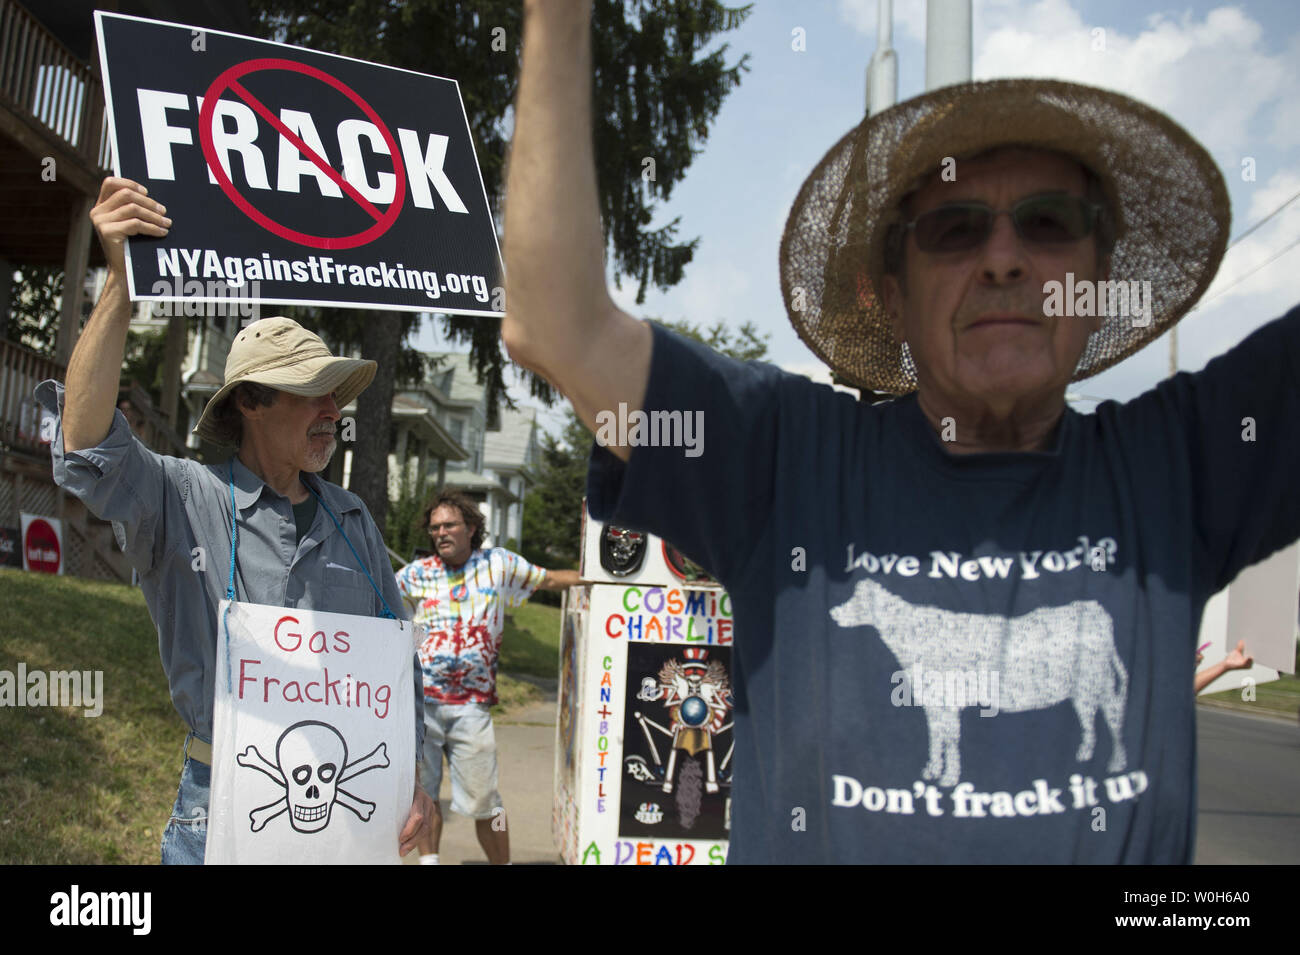 Demonstrators hold signs during a protest against fracking in Syracuse, New York on August 22, 2013. The group, New Yorkers Against Fracking, held the protest near a high school where President Barack Obama is schedule to speak.  UPI/Kevin Dietsch Stock Photo